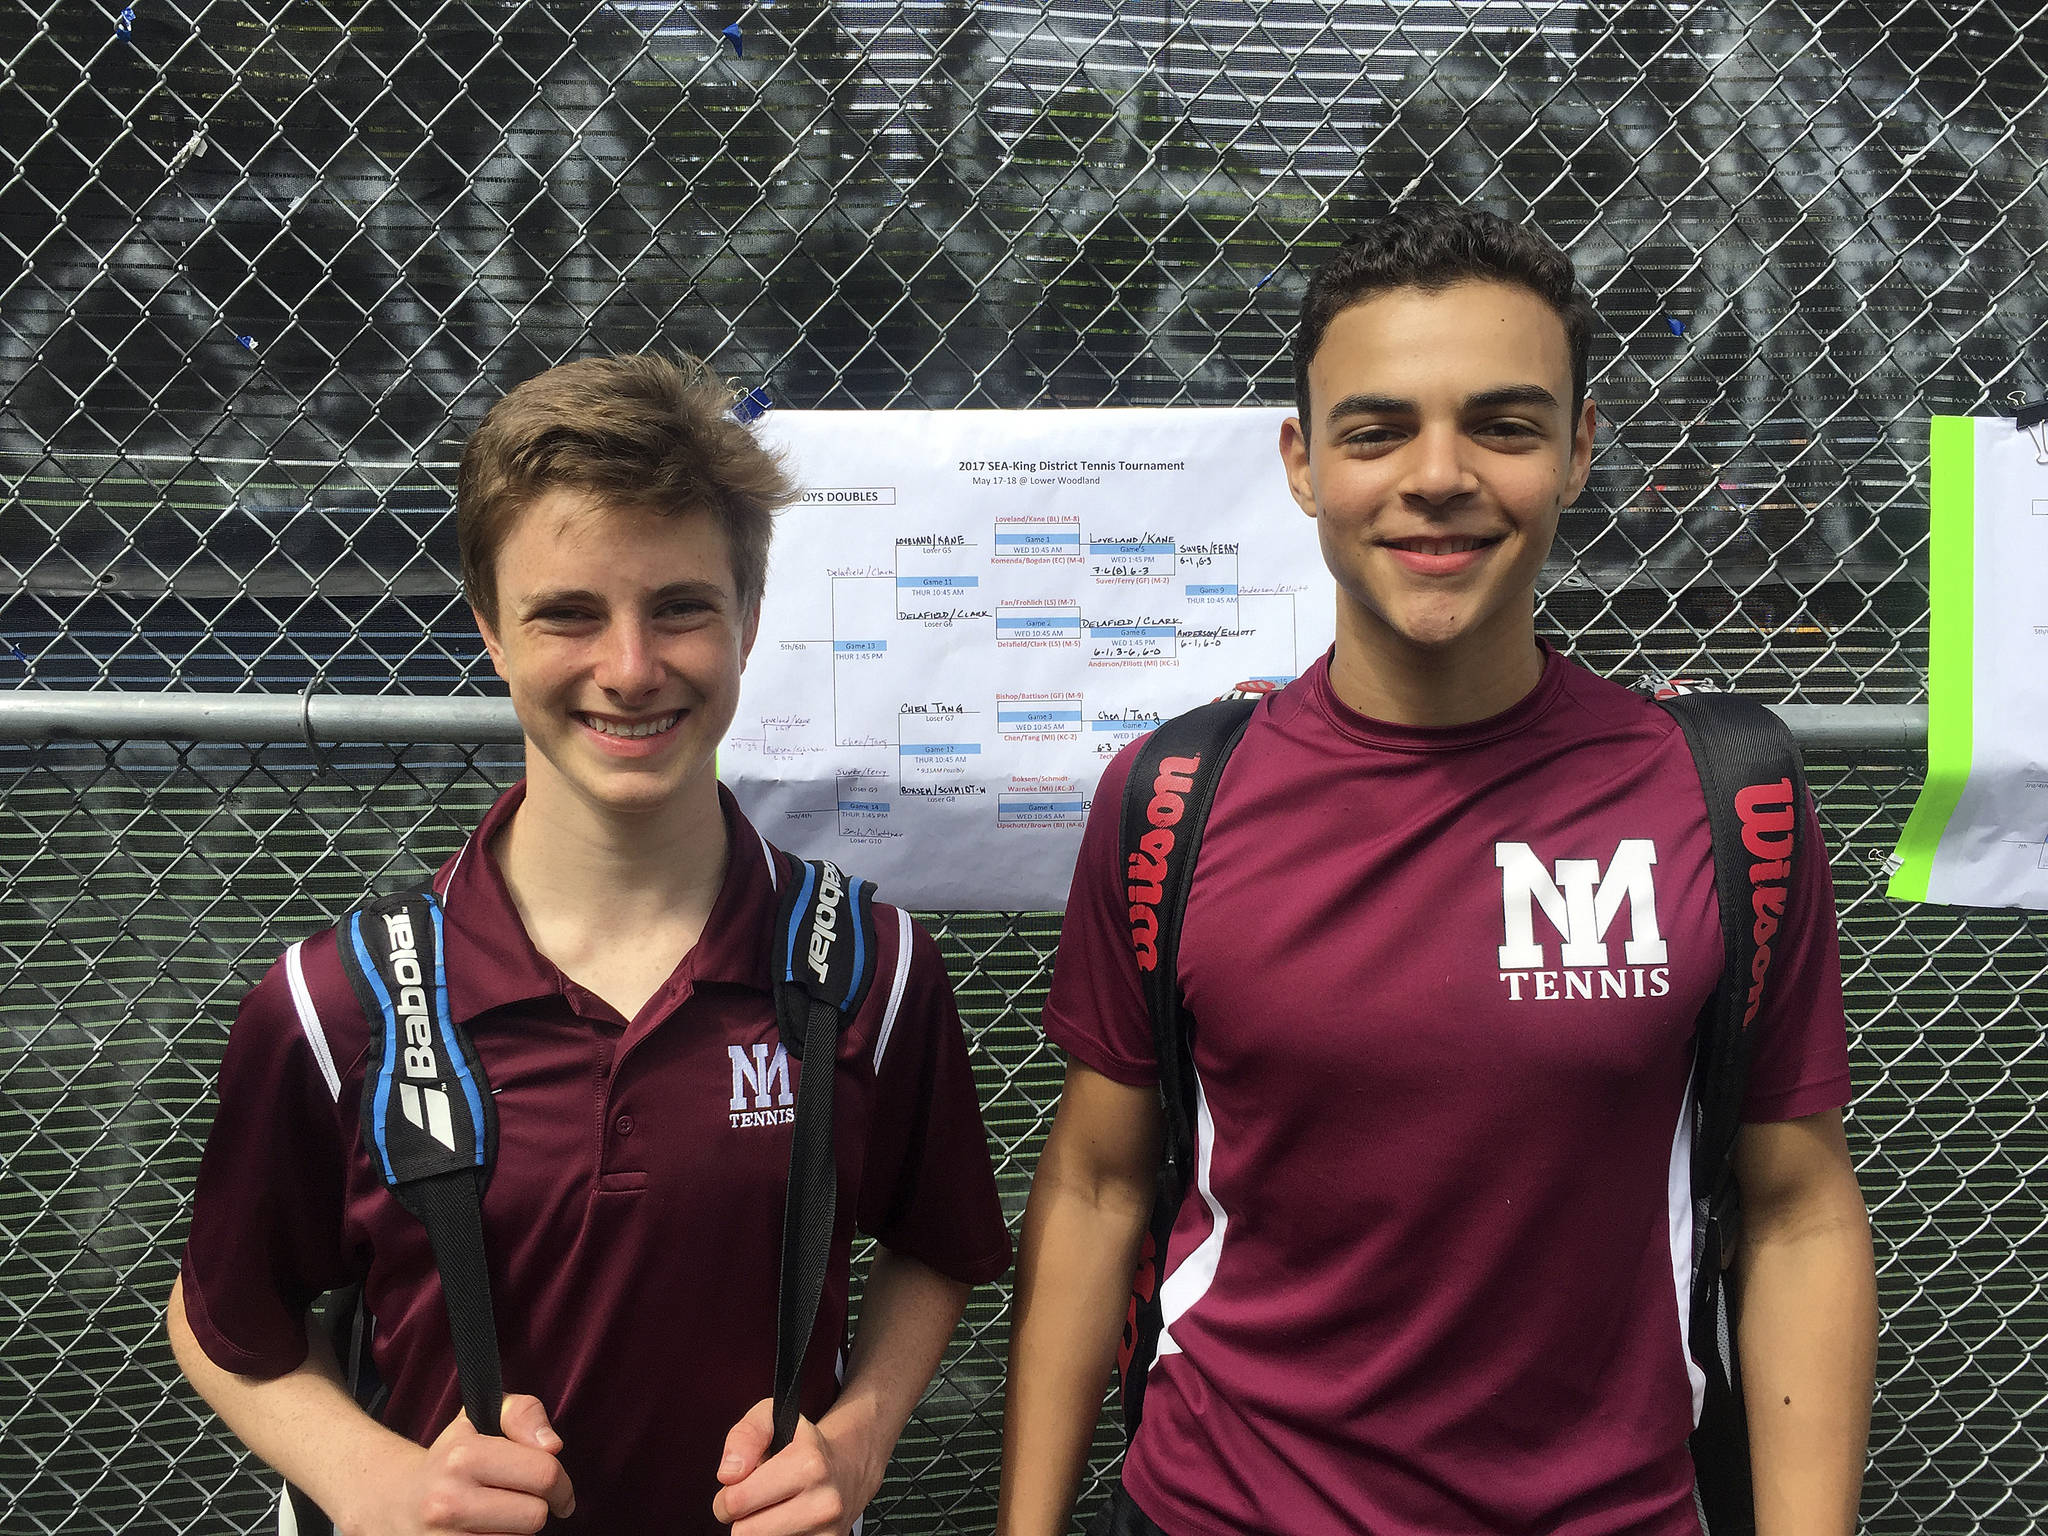 Photo courtesy of Carol Gullstad                                The Mercer Island boys doubles tennis squad consisting of Christian Anderson/Chris Elliot defeated Lakeside’s Eli Fonseca/Jason Edmonds 2-0 (6-2, 6-1) in the Class 3A 2017 Sea-King District doubles championship match on May 18 at Lower Woodland Park in Seattle. The Anderson/Elliot duo had a perfect 3-0 overall record at the tournament. The Islanders boys tennis team won the Sea-King district tournament as a team. The Mercer Island girls tennis doubles team consisting of Chloe Gage and Grace Bethards captured fourth place as well at the Sea-King tournament.